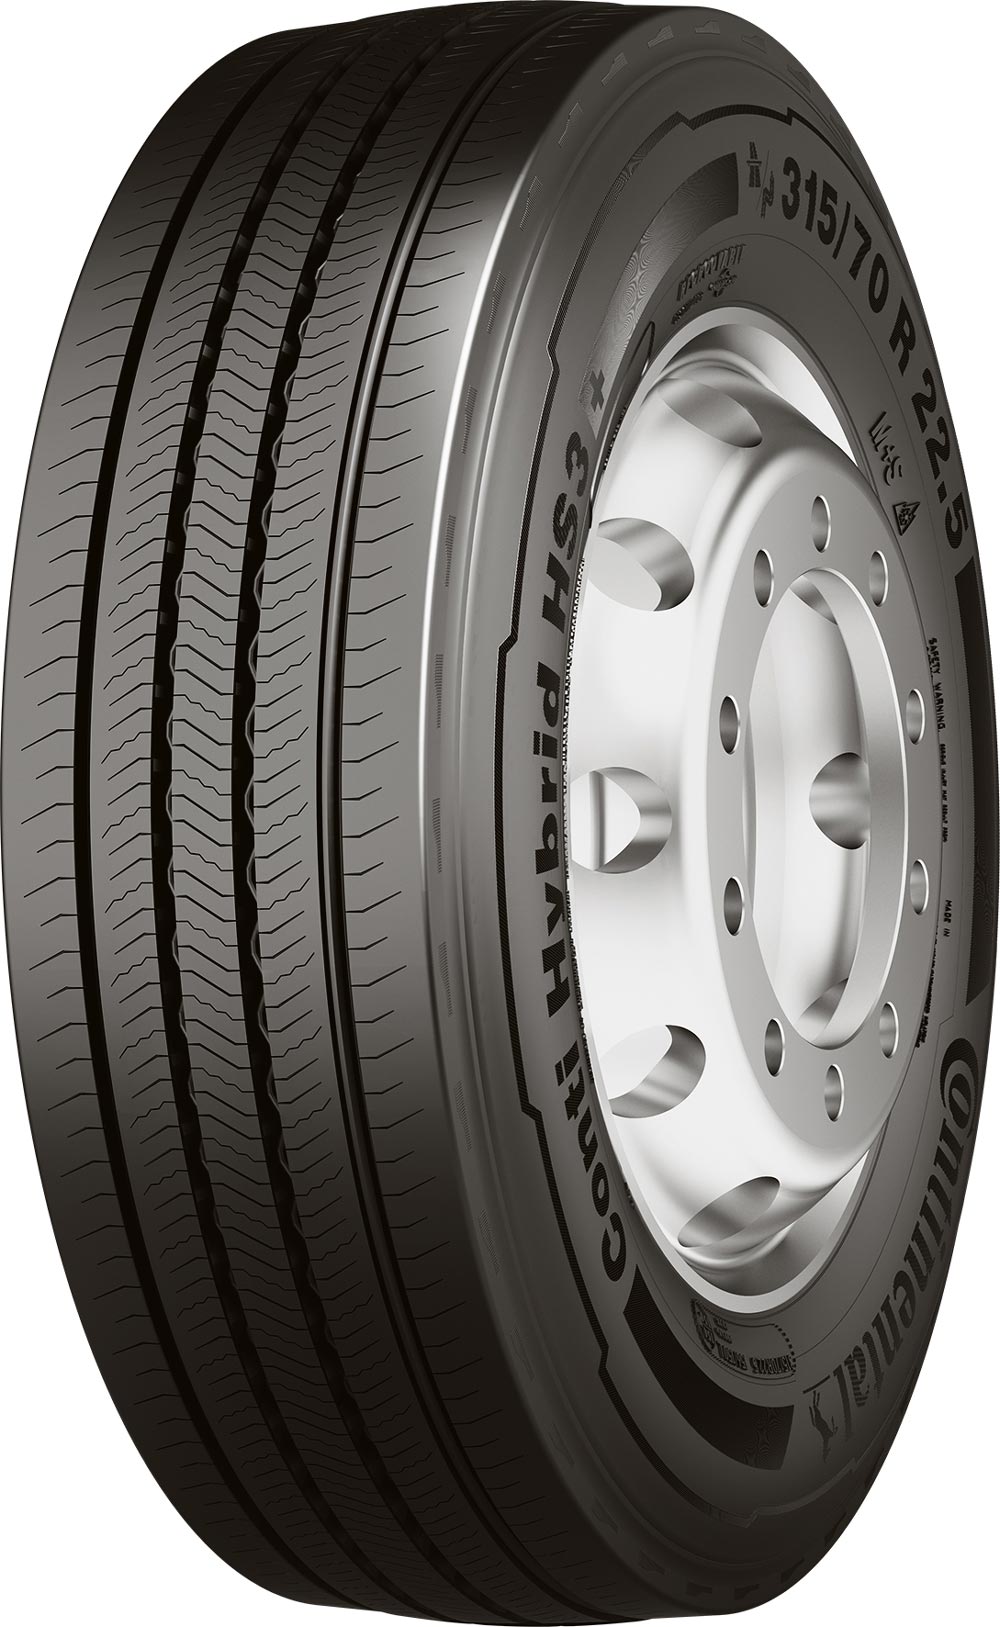 product_type-heavy_tires CONTINENTAL Conti Hybrid HS3+ 315/70 R22.5 156L